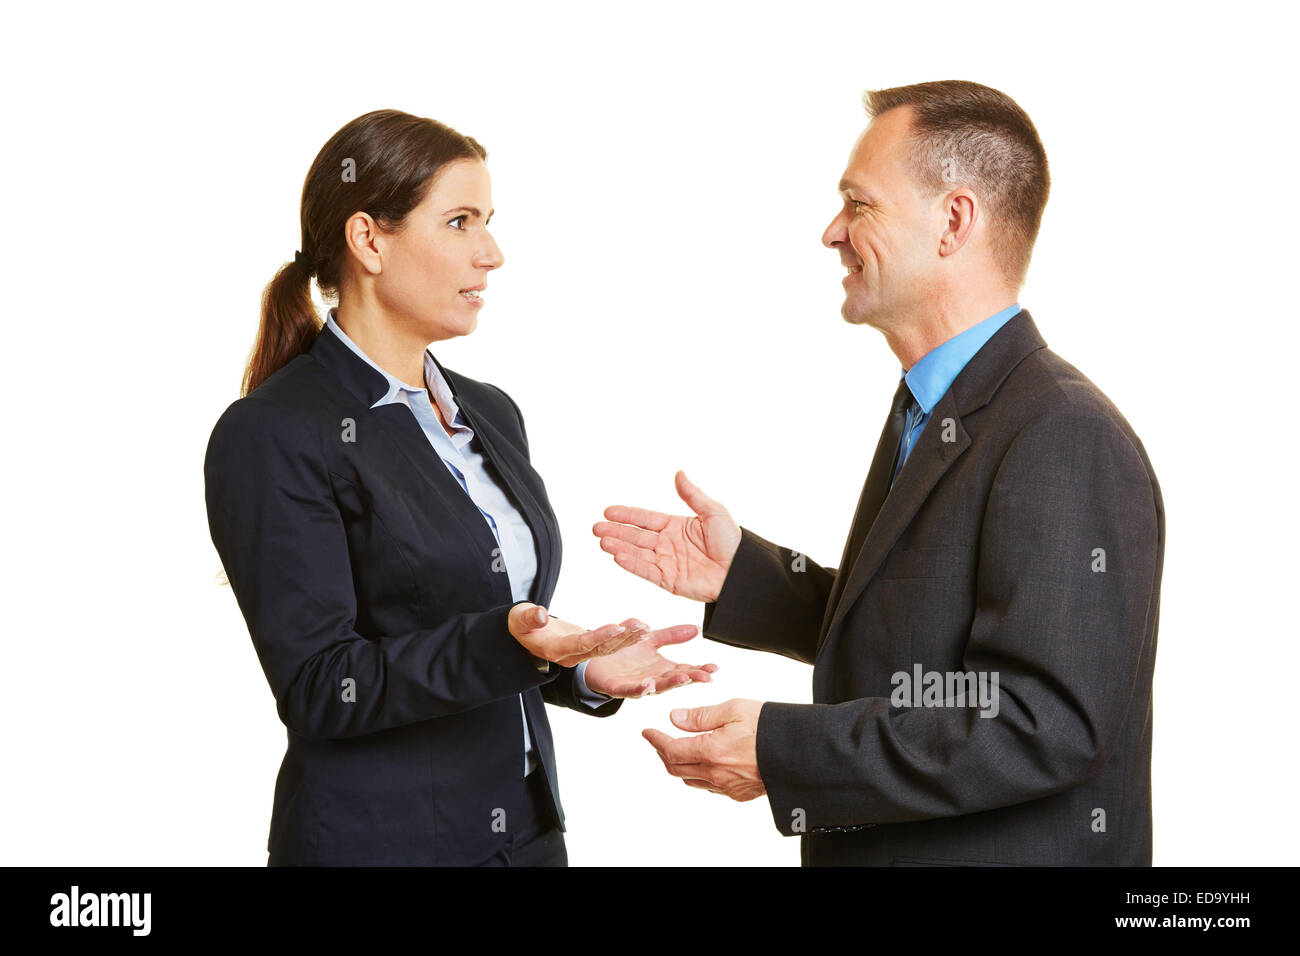 Communication with two talking business people with mimic and gestures Stock Photo